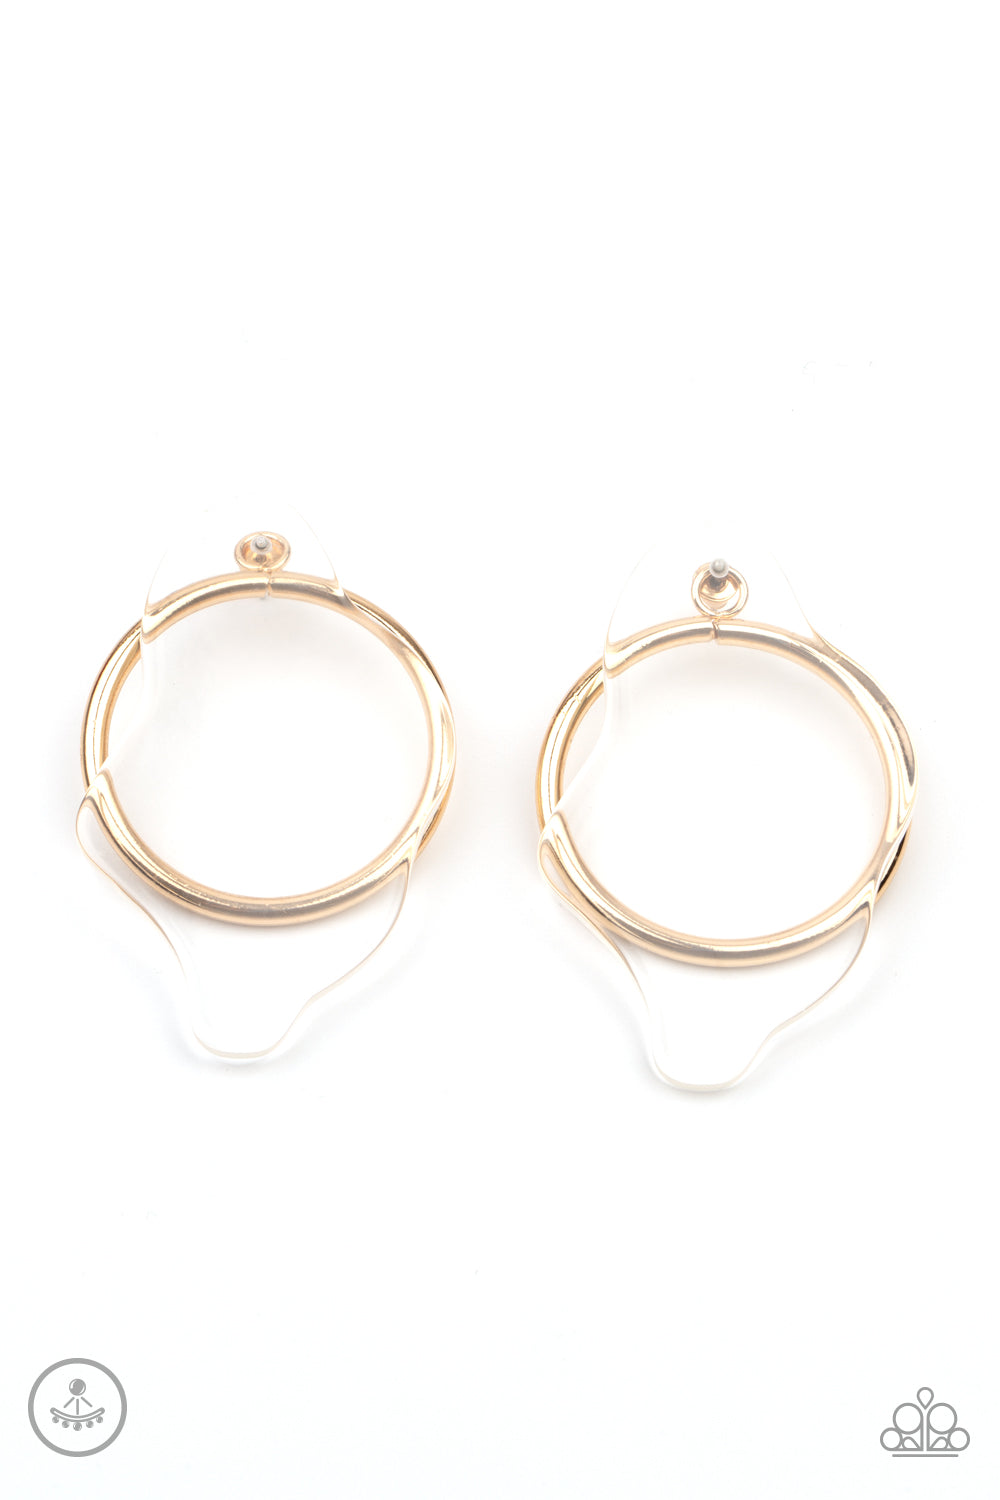 Clear the Way! - gold - Paparazzi earrings